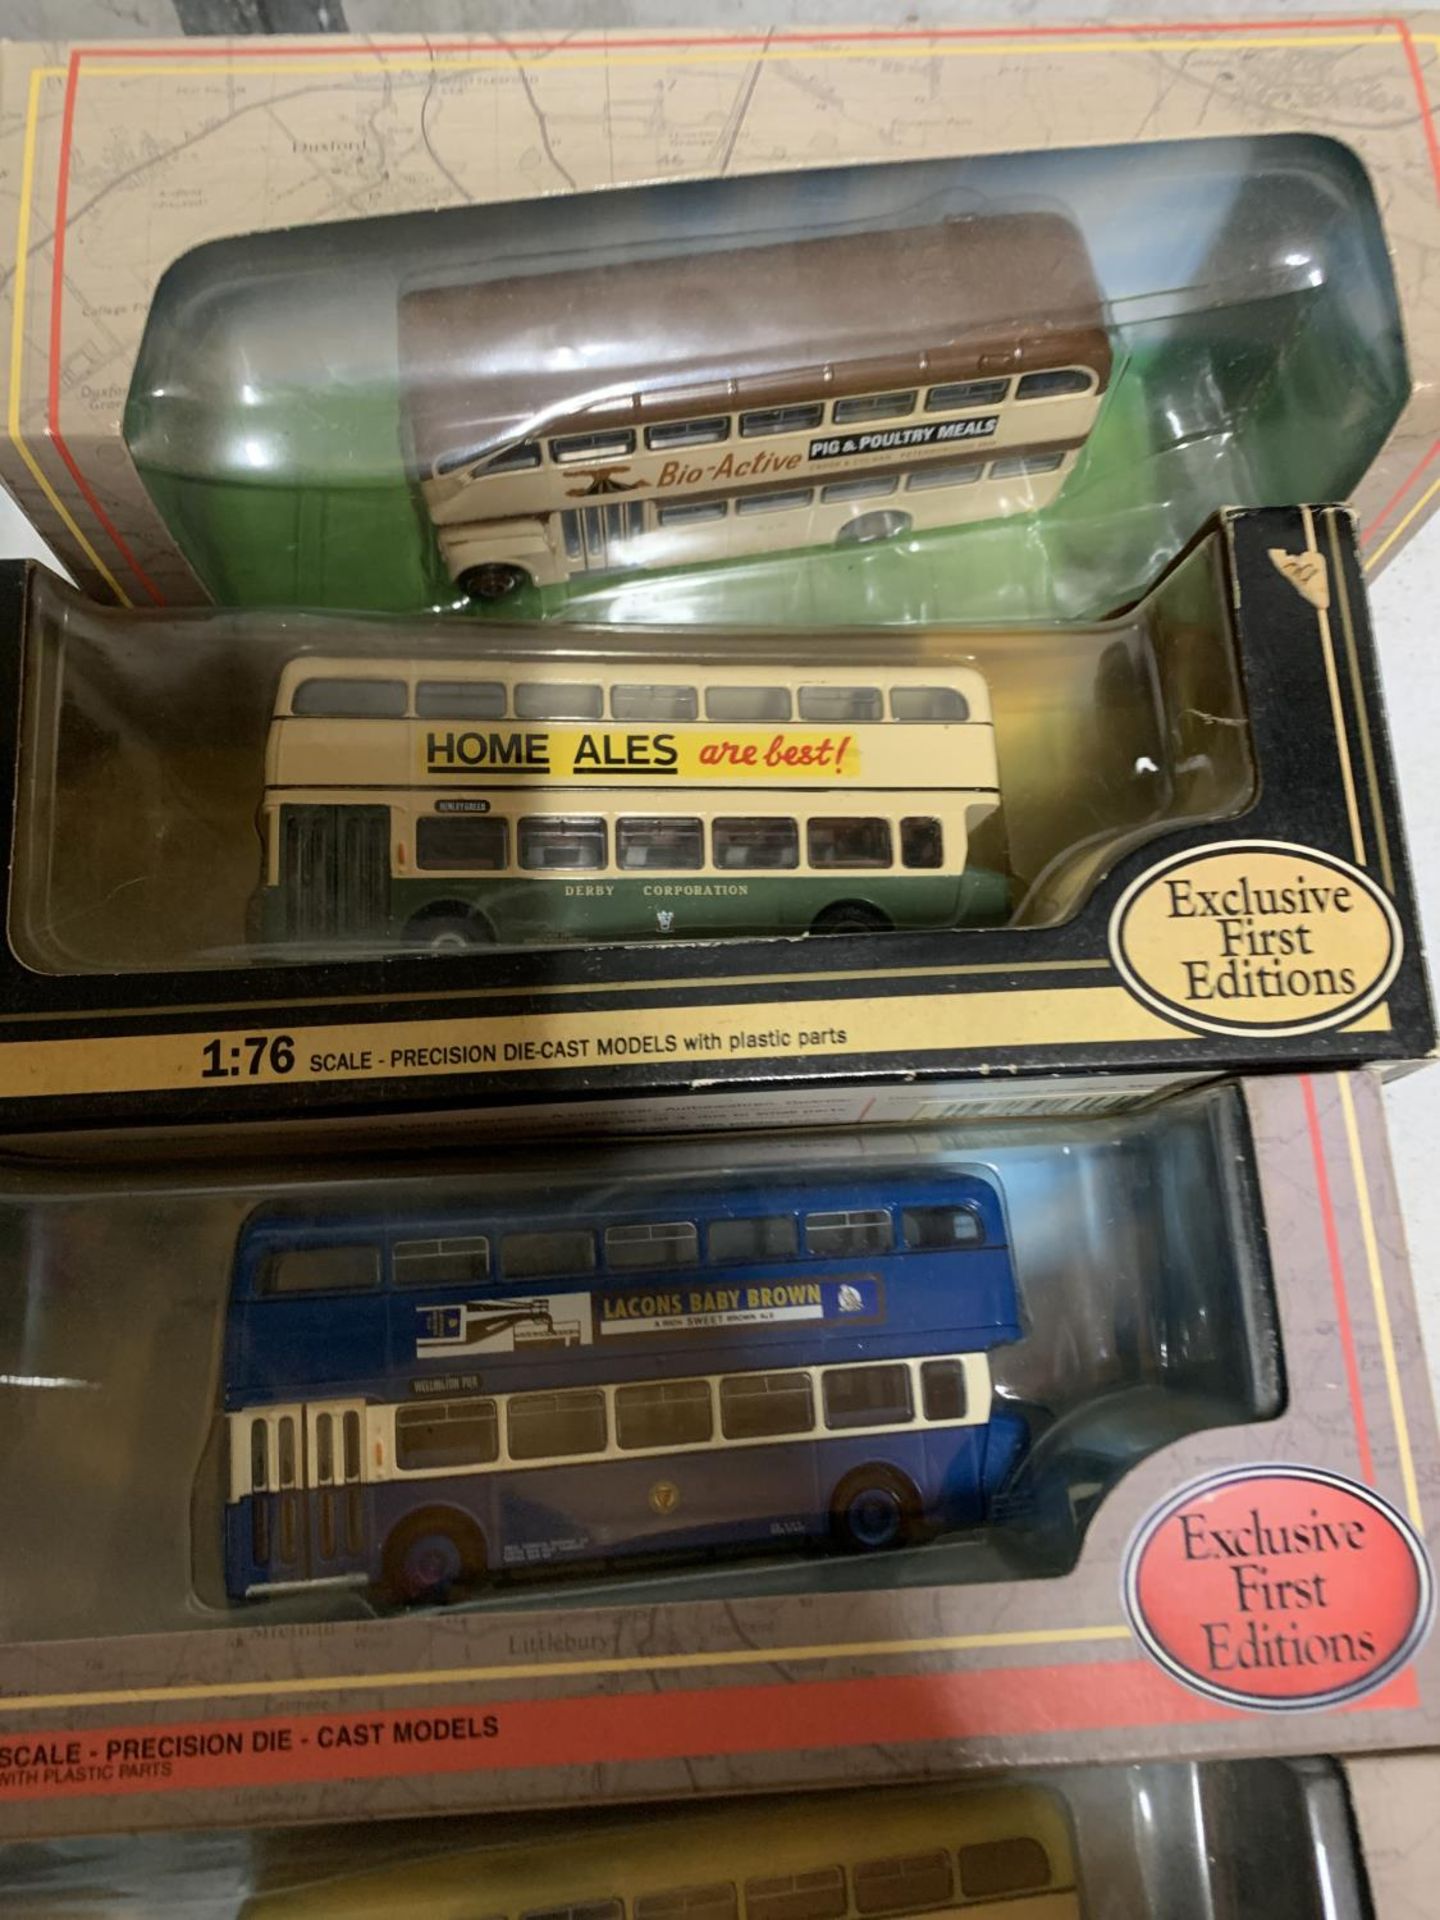 EIGHT BOXED GILBOW BUSES, EXCLUSIVE FIRST EDITIONS, SCALE 1:76 - AS NEW - Image 4 of 4